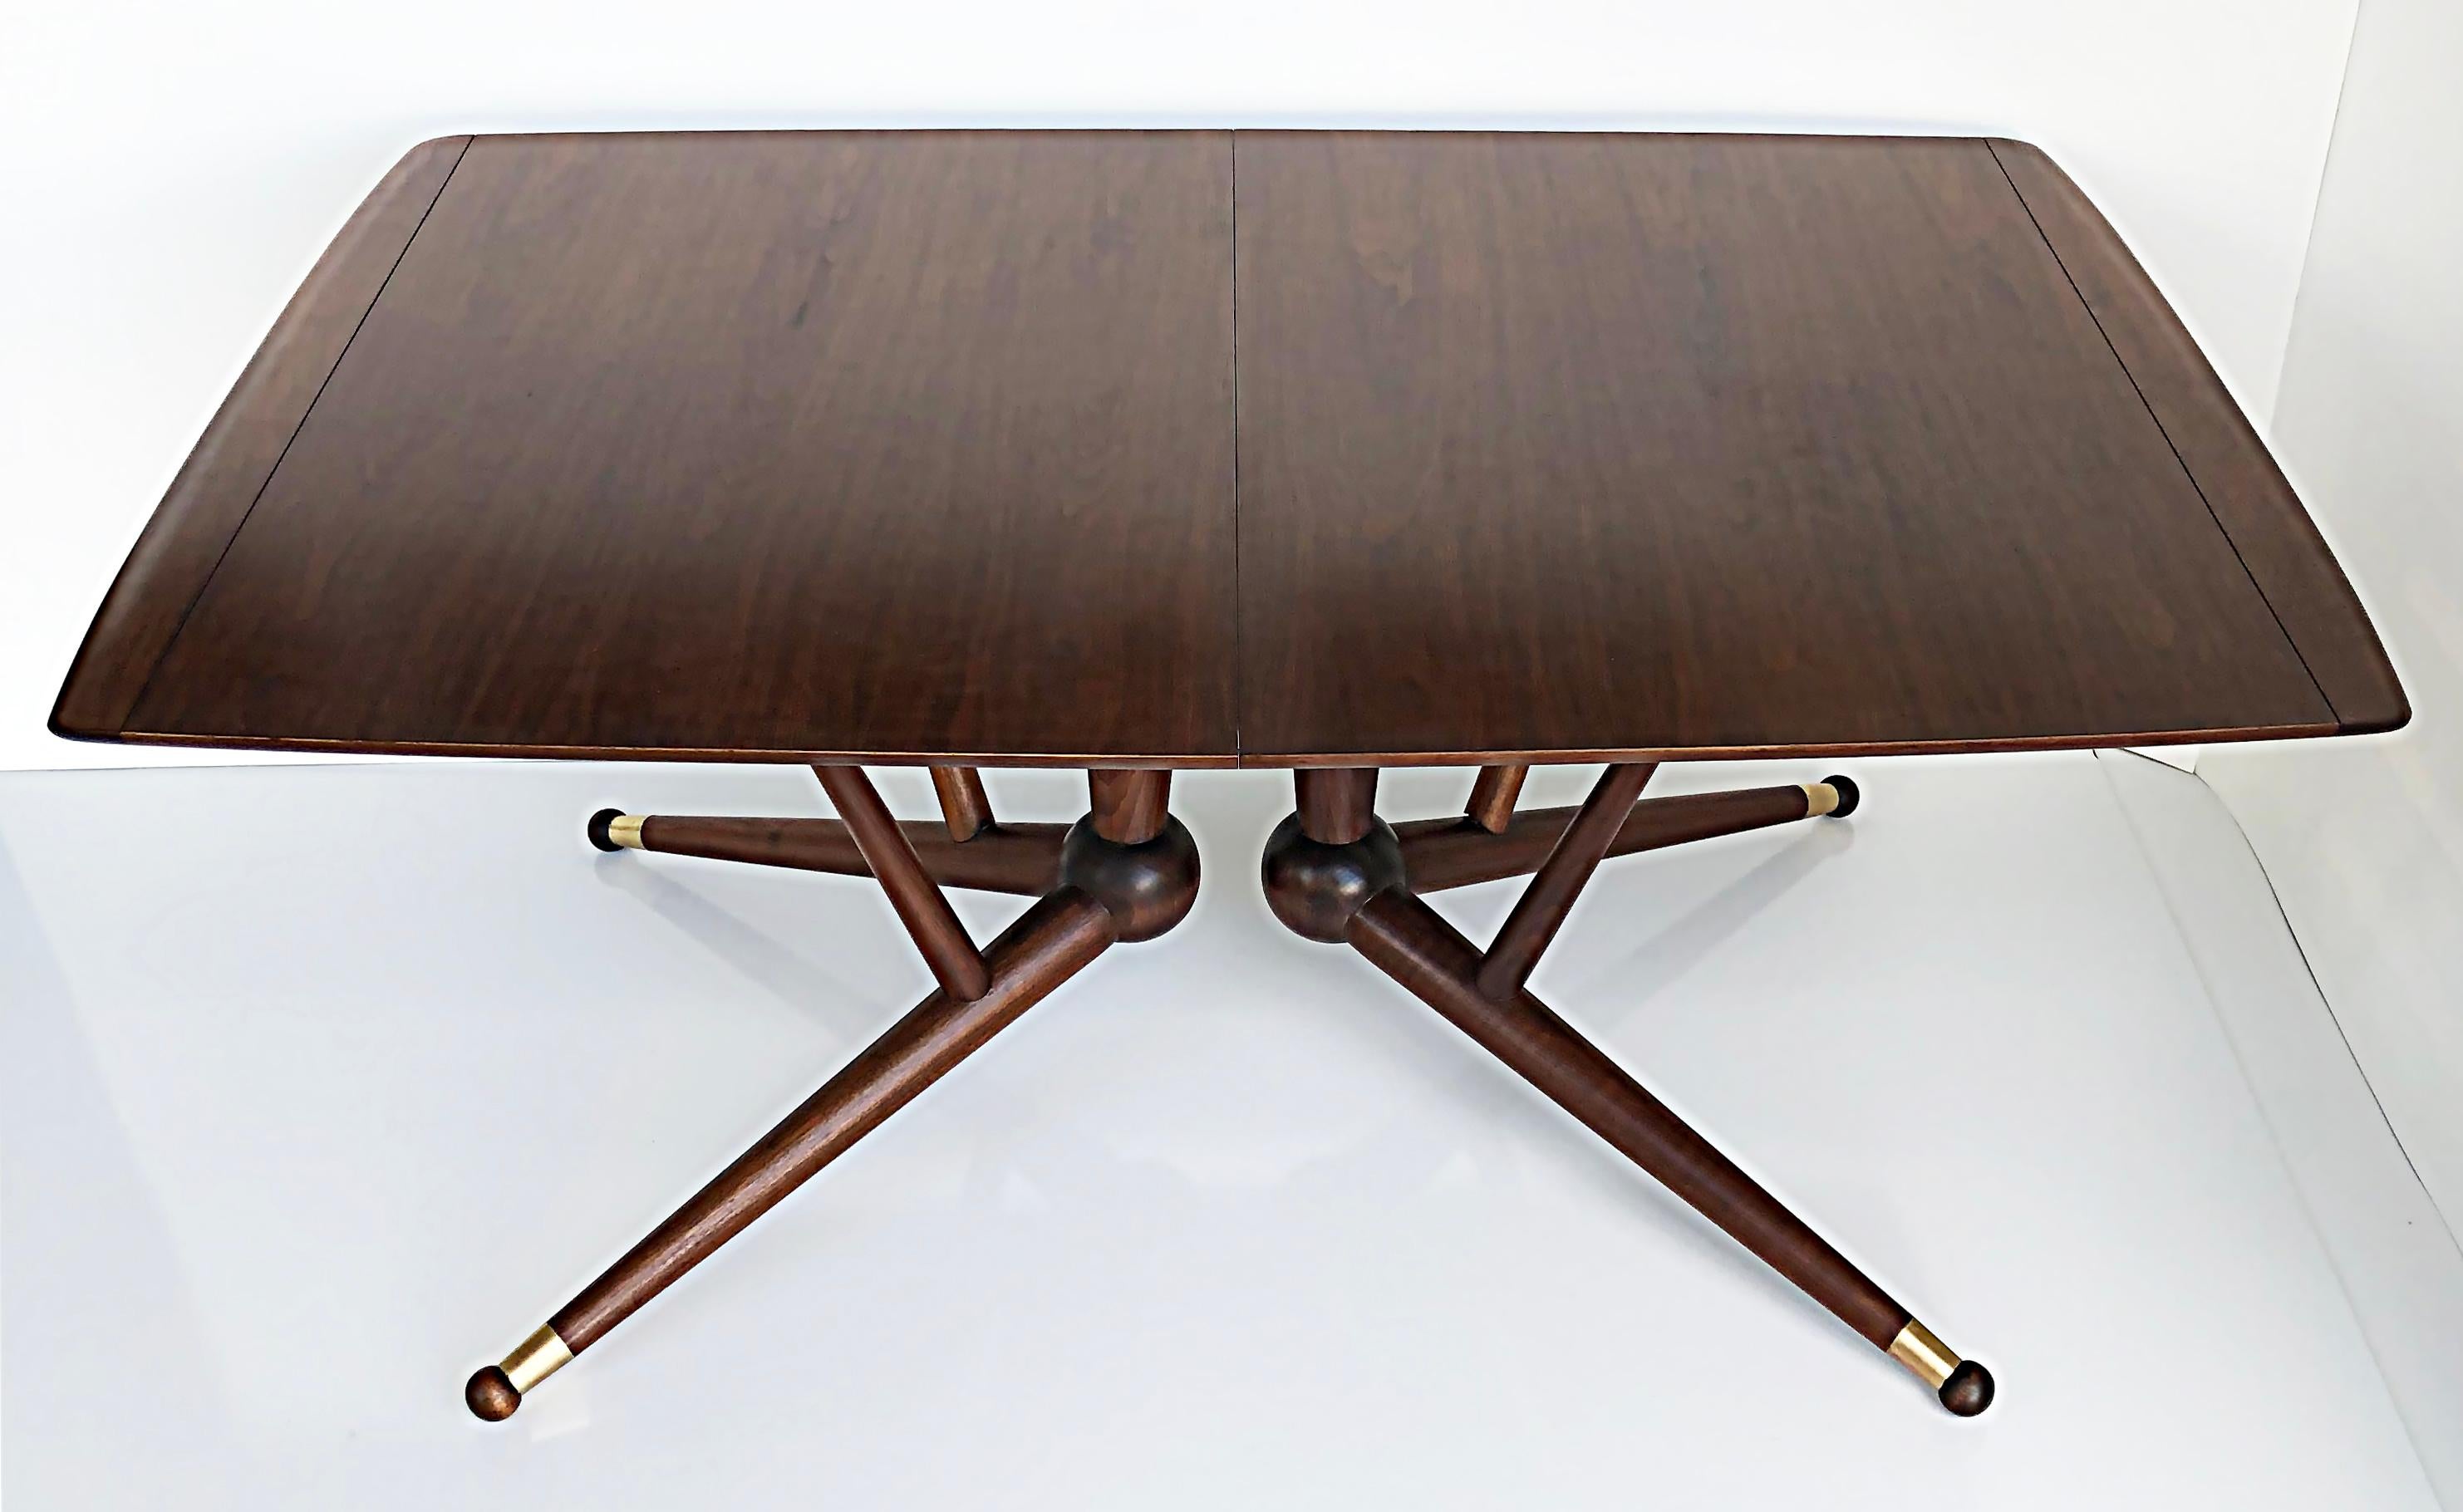 American Mid-Century Modernist Expandable Dining Table with Two Wood Leaves In Good Condition For Sale In Miami, FL